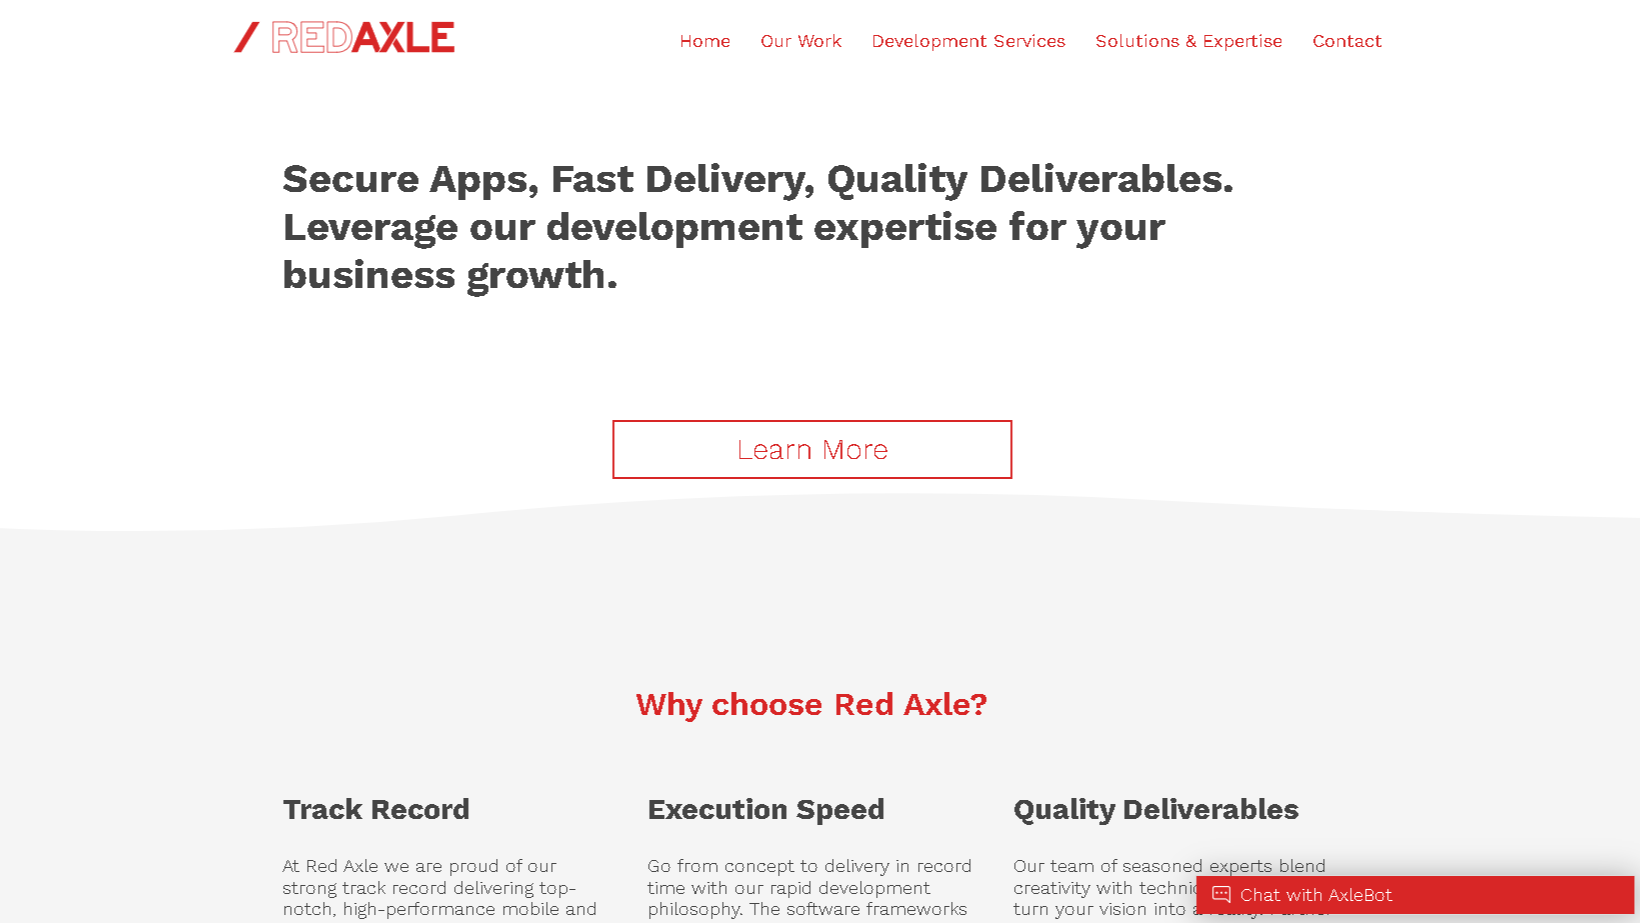 Red Axle